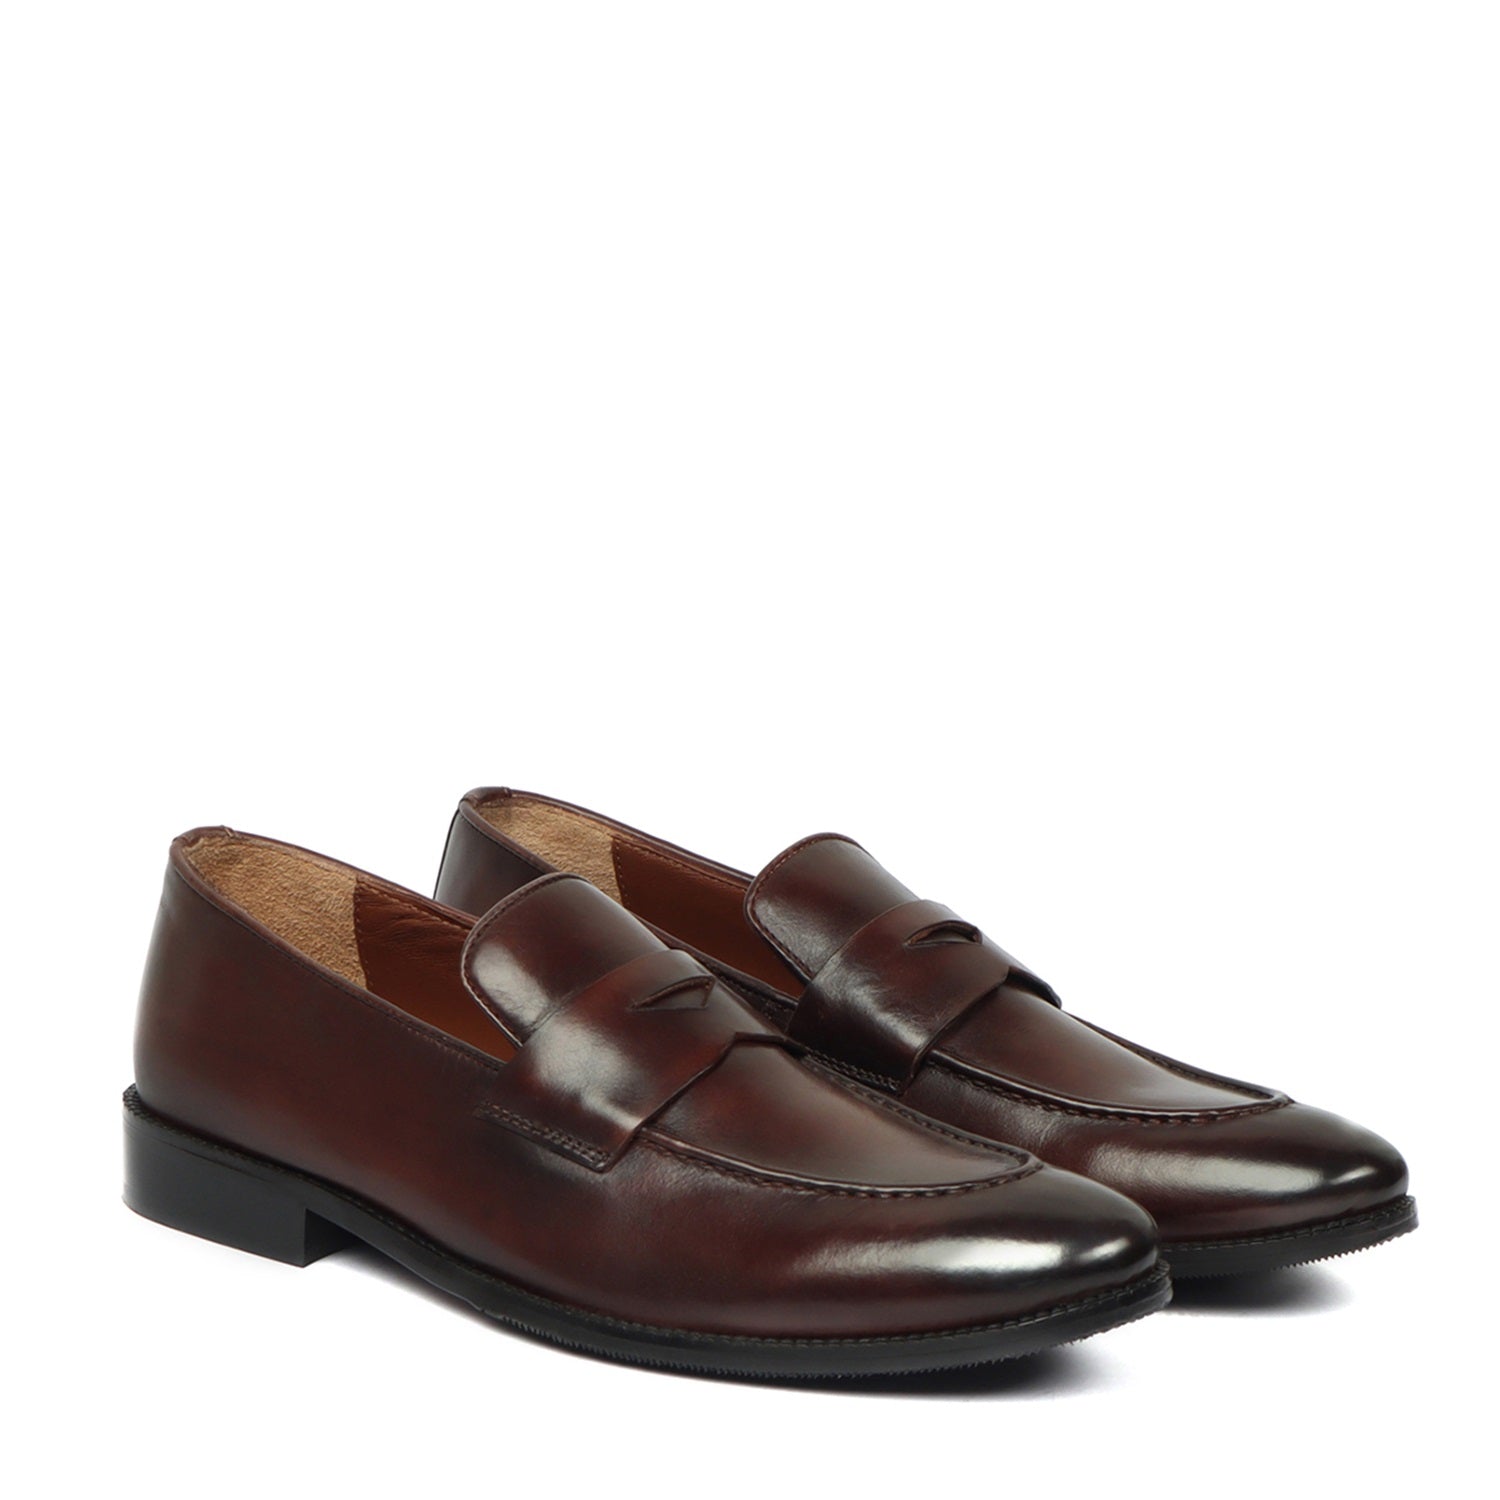 Dark Brown Leather Penny Loafers With Triangular Cut-Strap